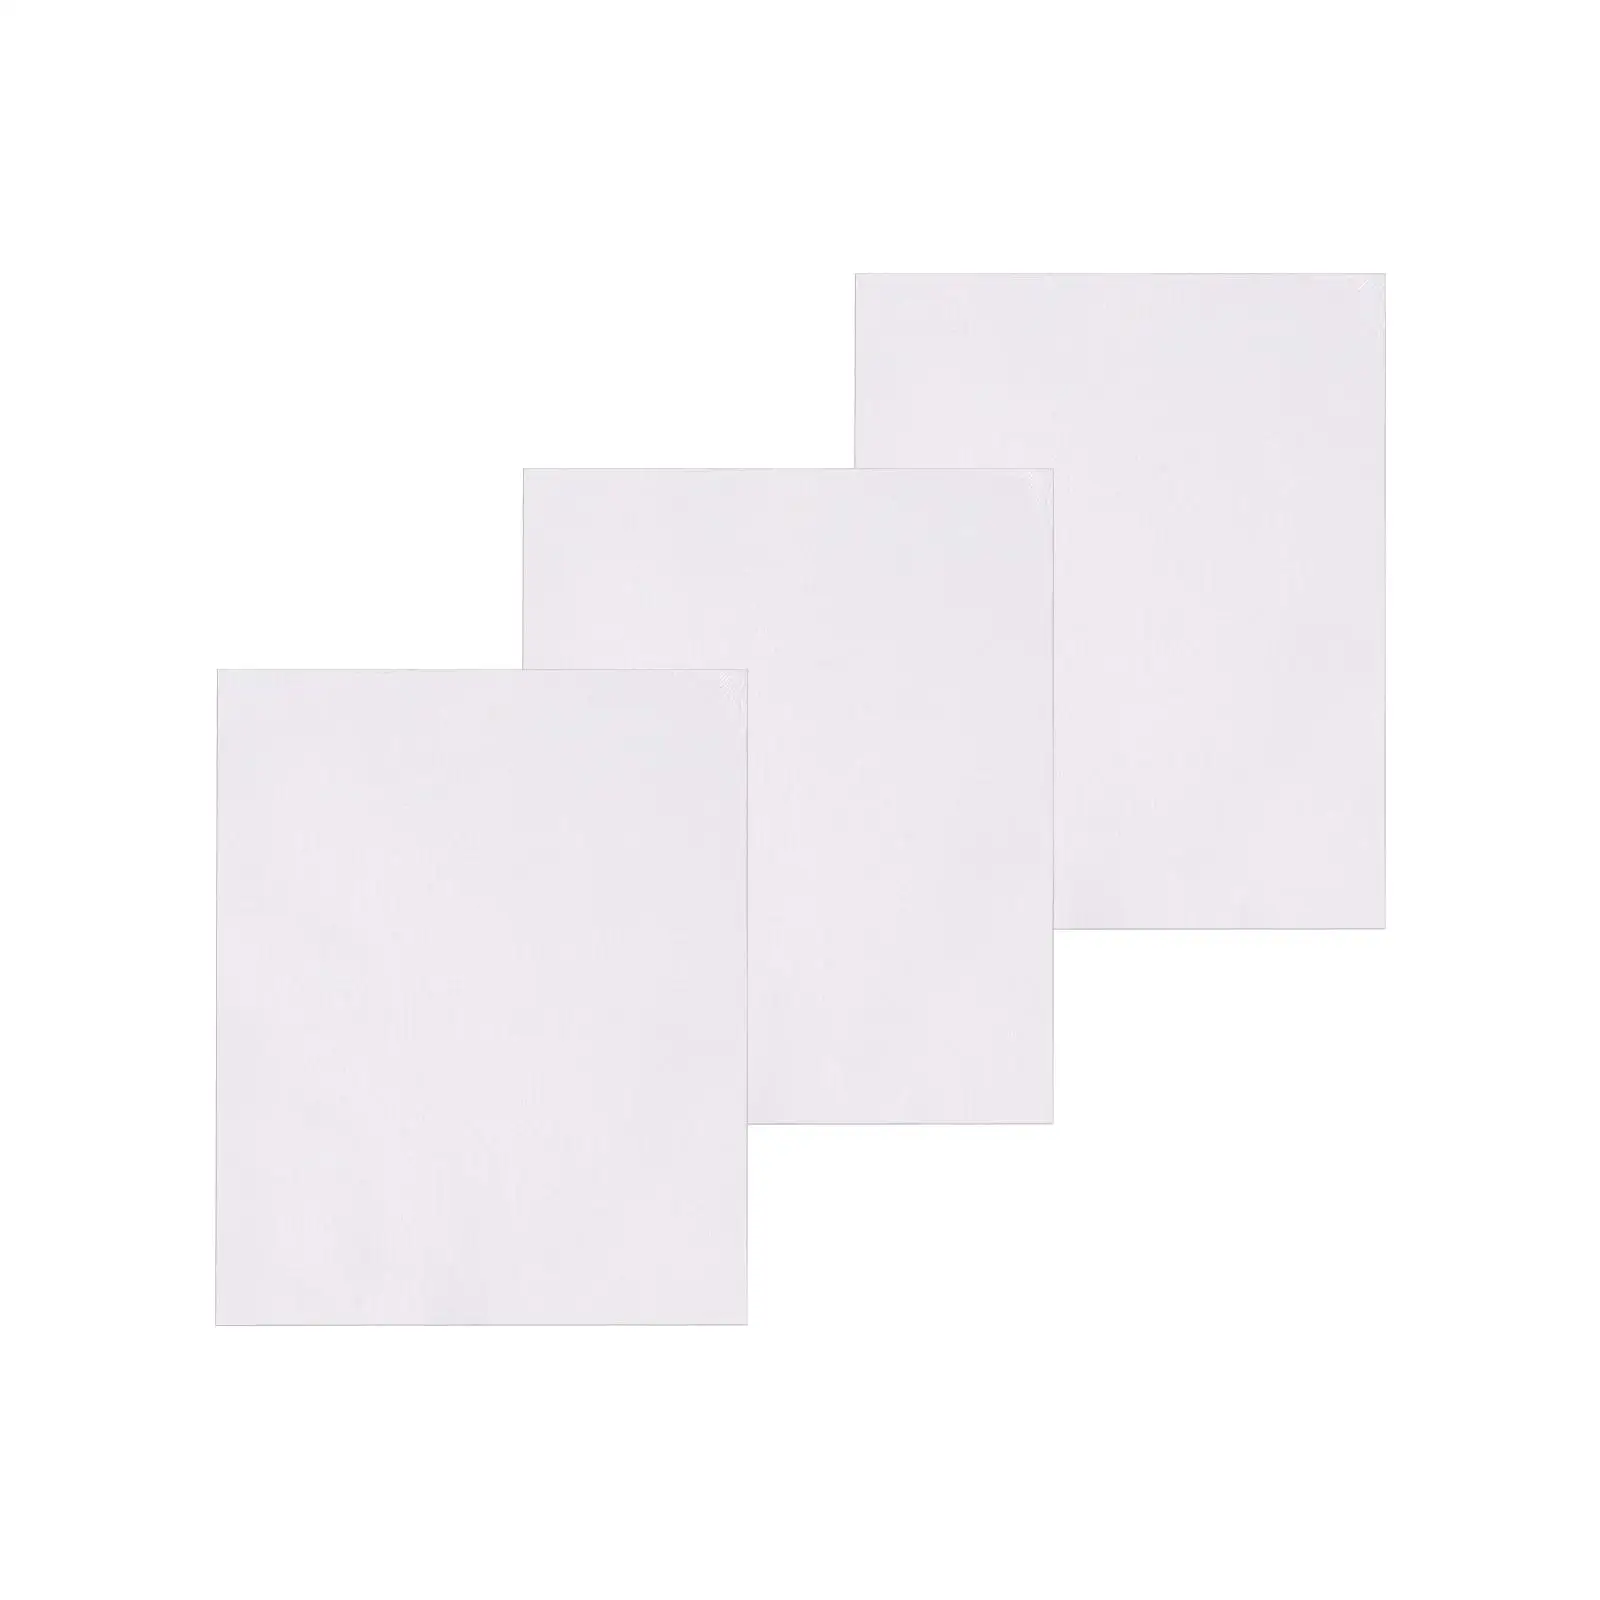 3x Cotton Artist Blank Canvas Boards Acrylic Oil Painting Artist Boards DIY Art Supplies Canvas Panels for Students Beginners